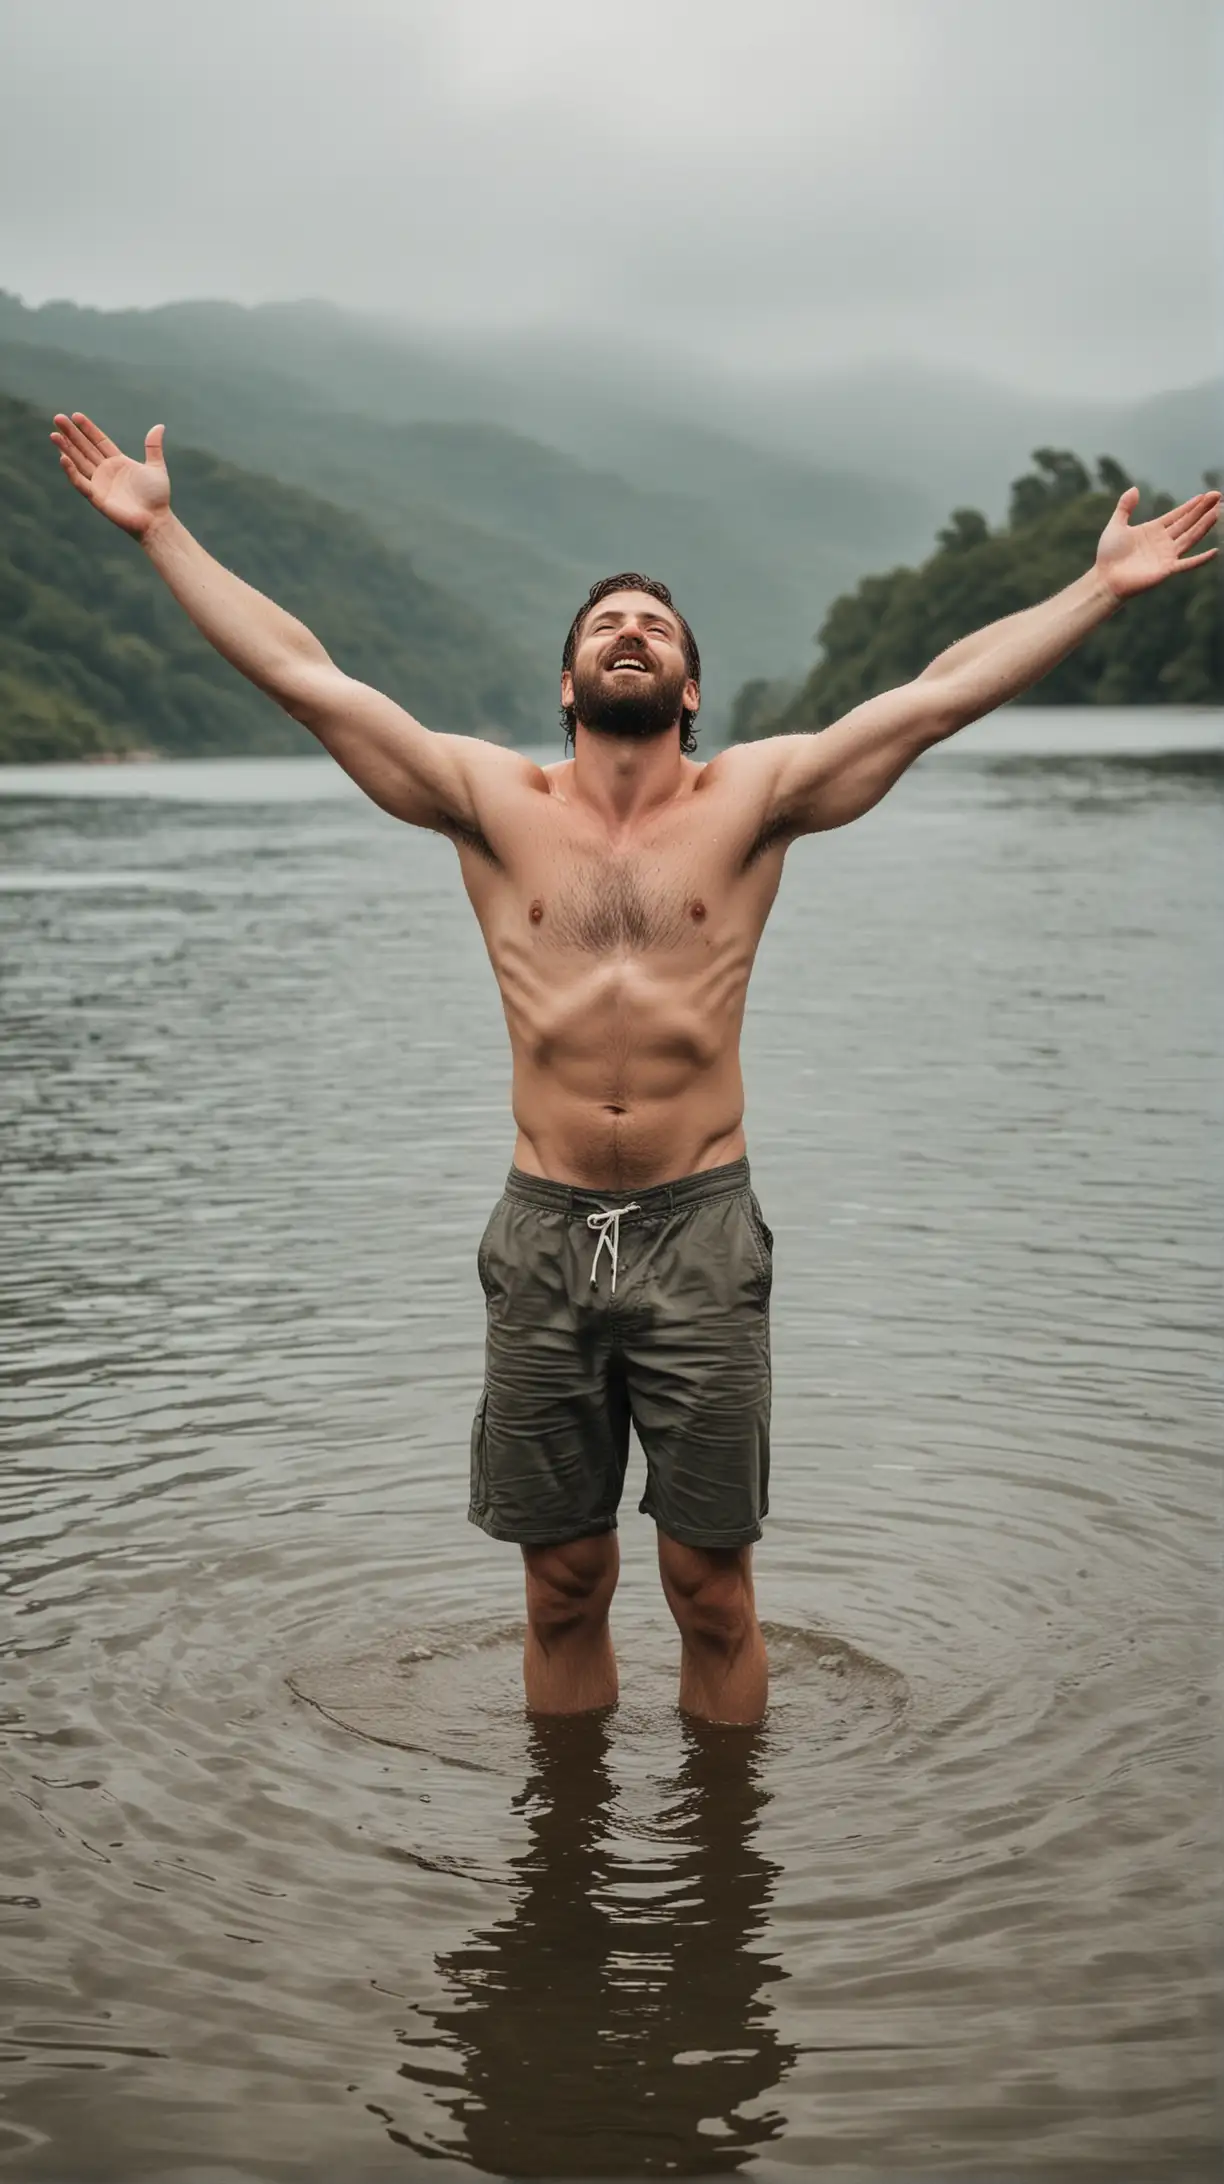 man standing in water, shirtless, arms outstretched, looking upward, beard